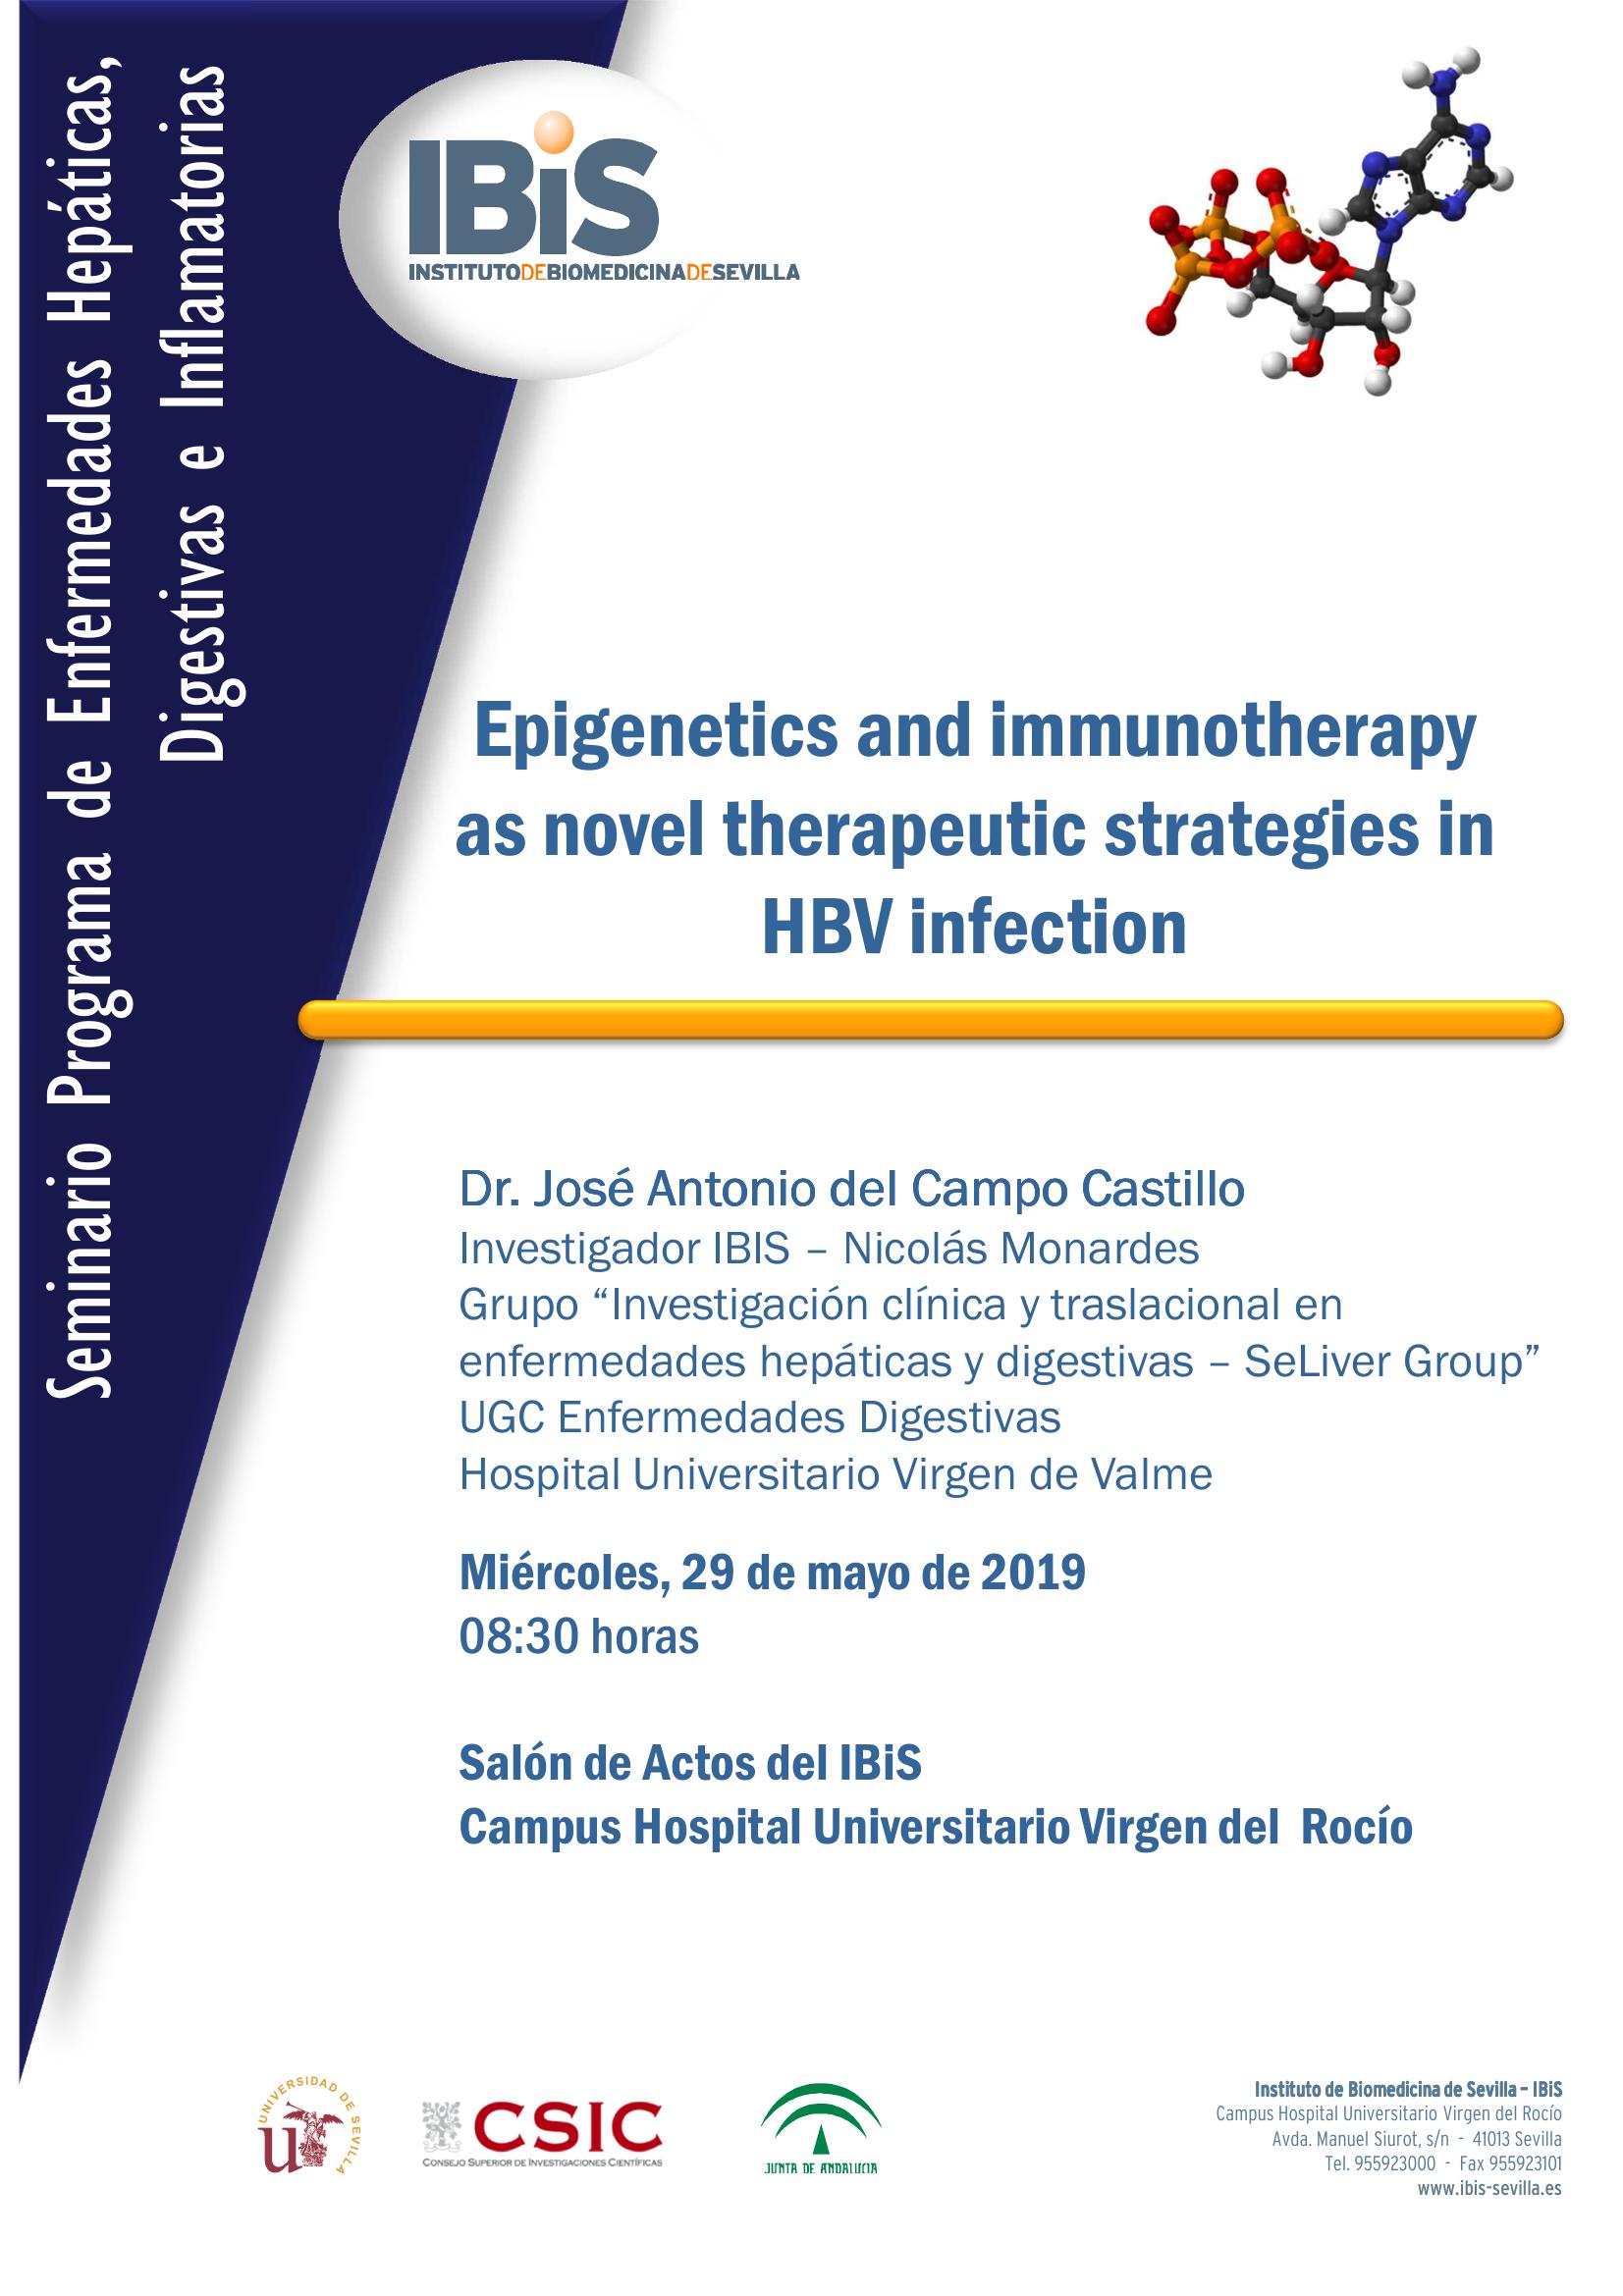 Poster: Epigenetics and immunotherapy as novel therapeutic strategies in HBV infection